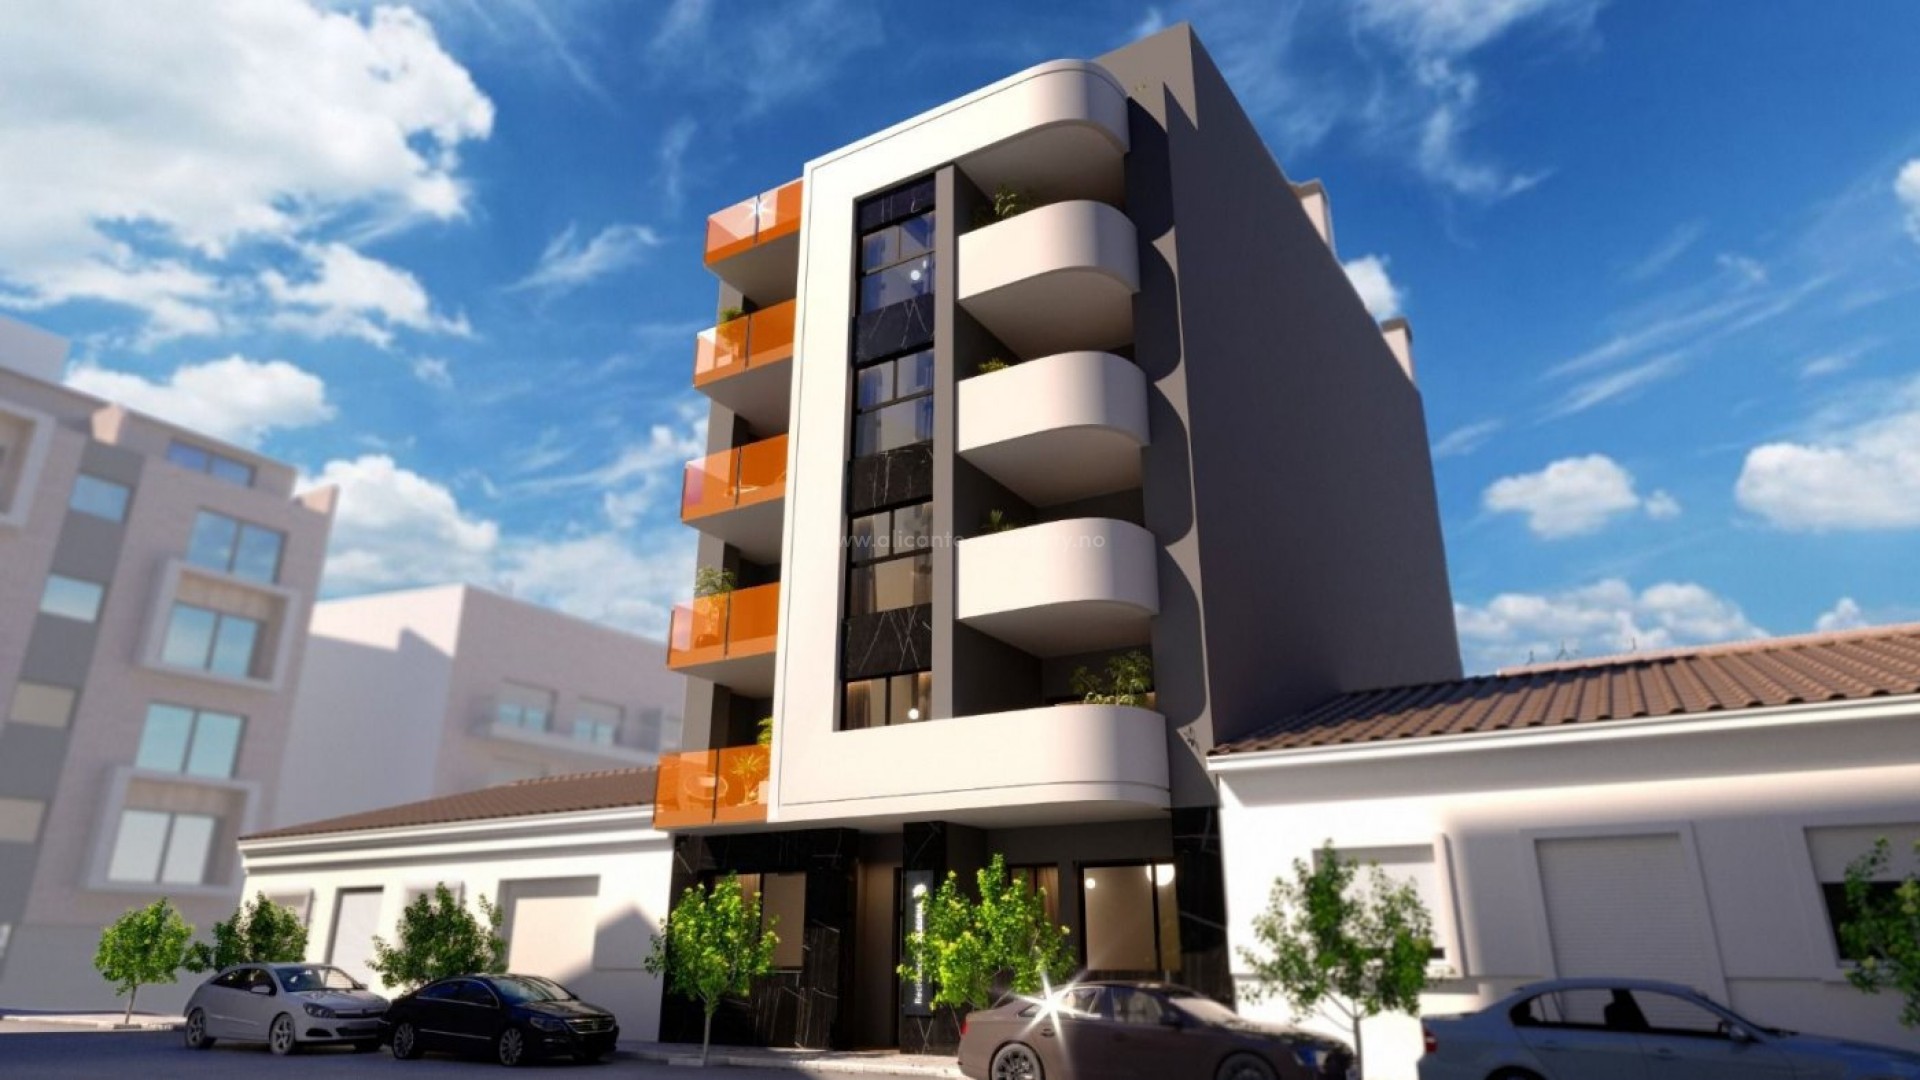 Apartments 200 meters from the Playa del Cura beach in Torrevieja, Alicante, 2 bedrooms, 2 bathrooms, shared swimming pool with sauna and shared solarium